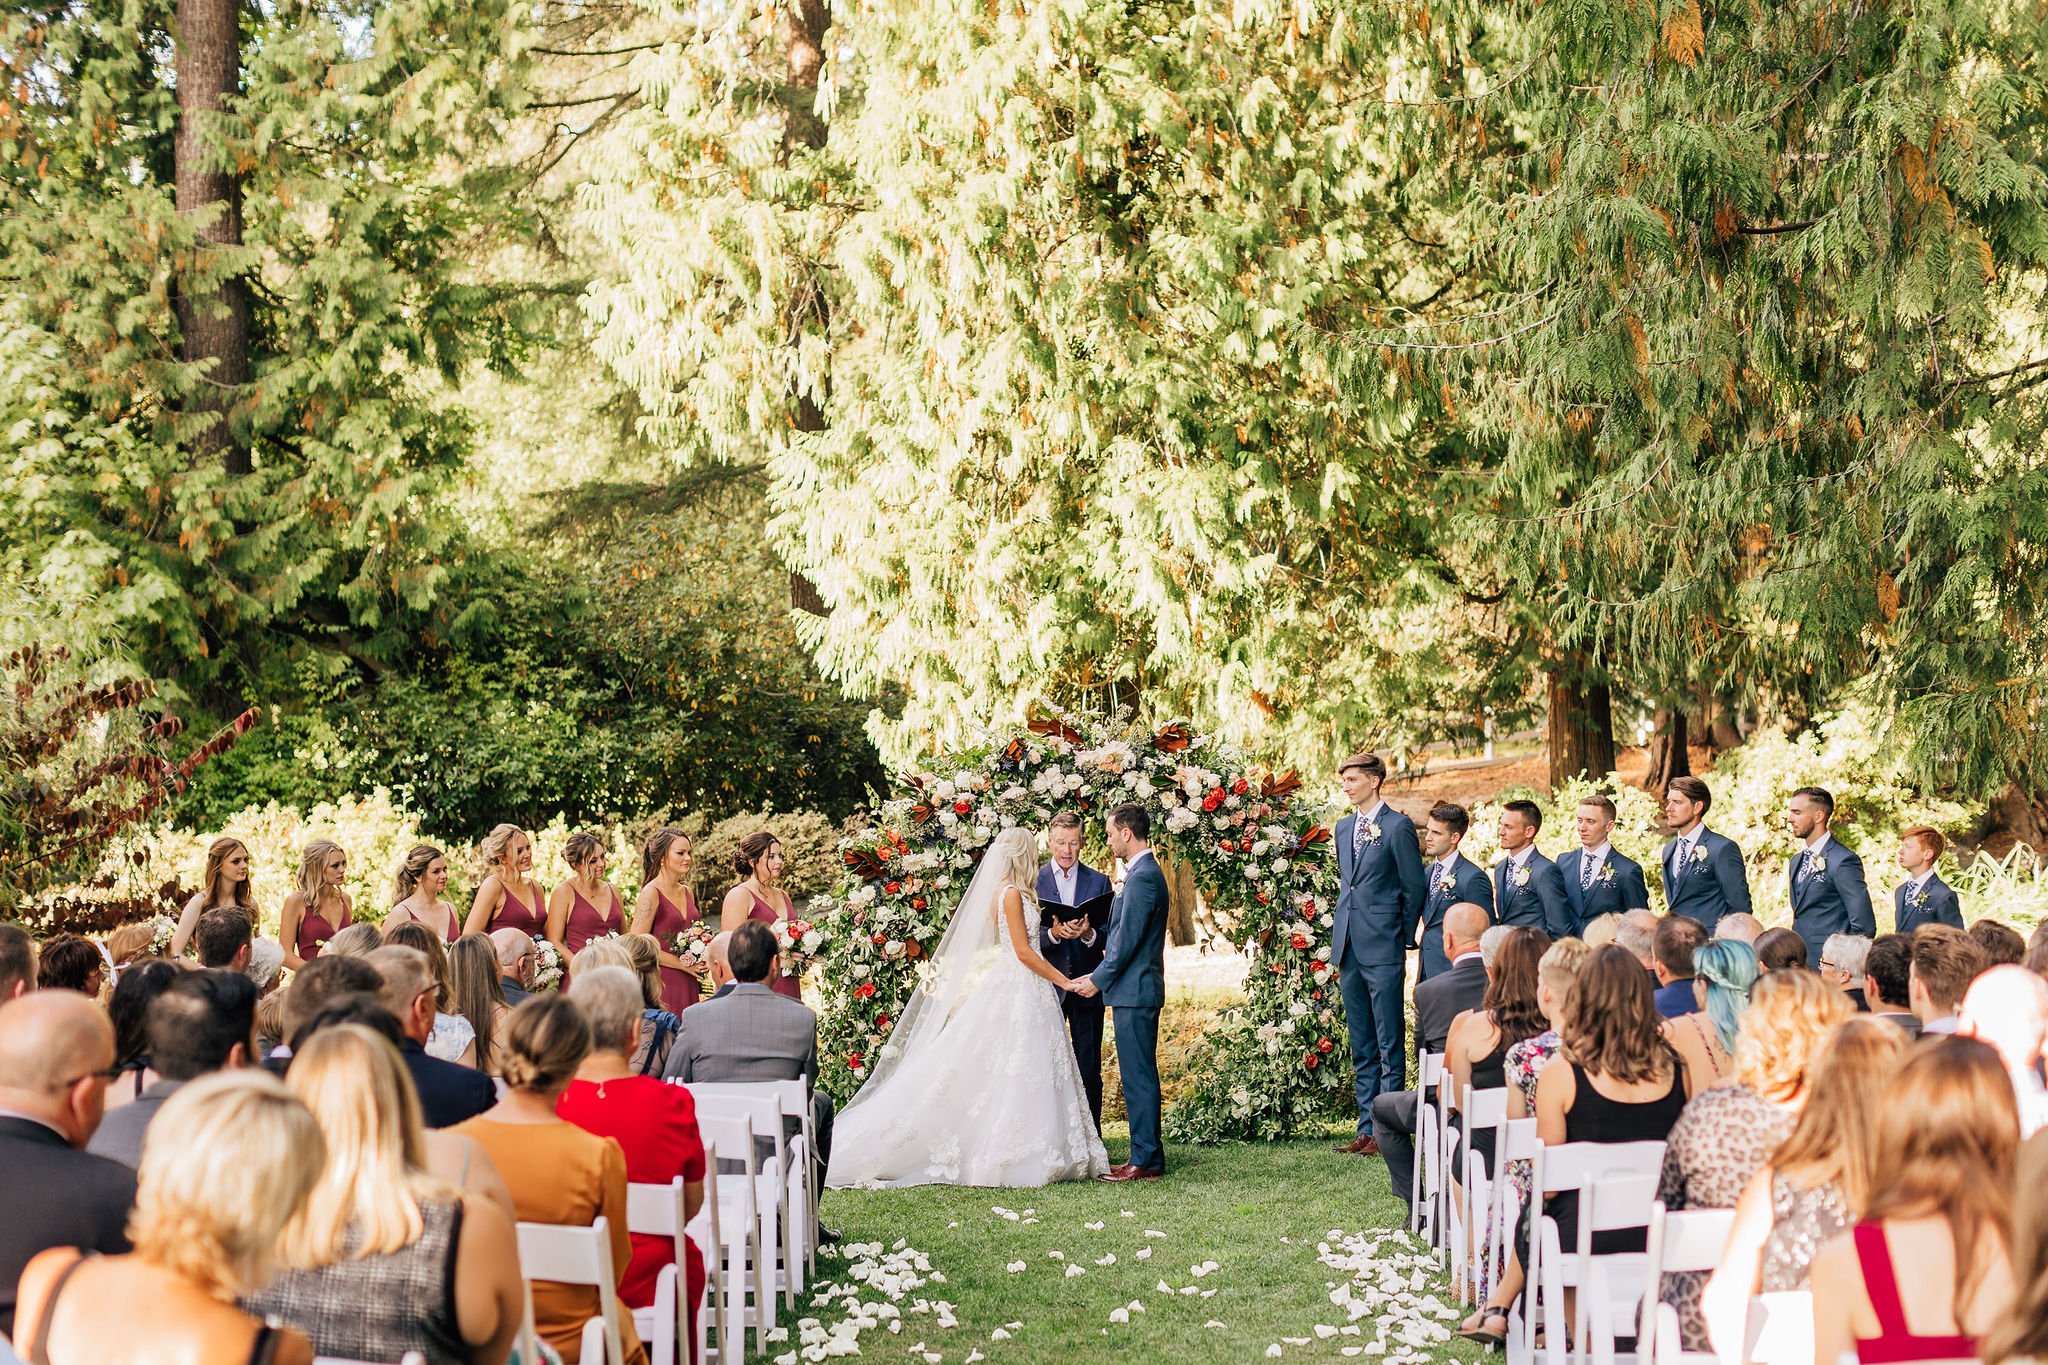 Woodinville-winery-wedding-chateau-lill-wedding-ceremony-outdoors